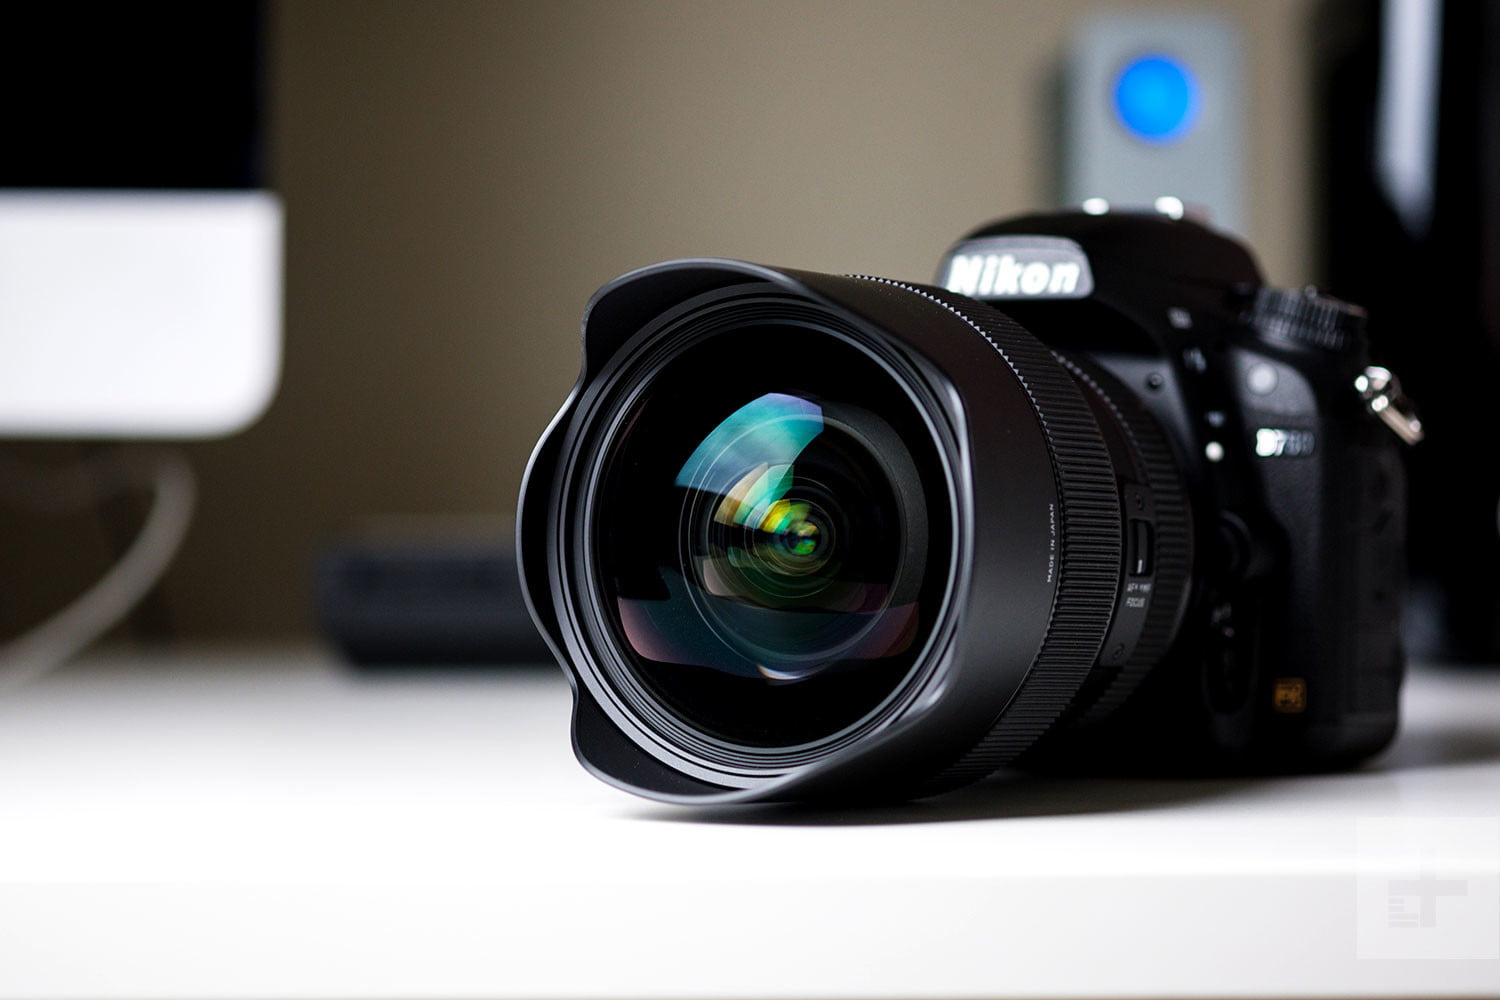 SUPERCOMPLETE GUIDE TO BUY YOUR FIRST SLR CAMERA